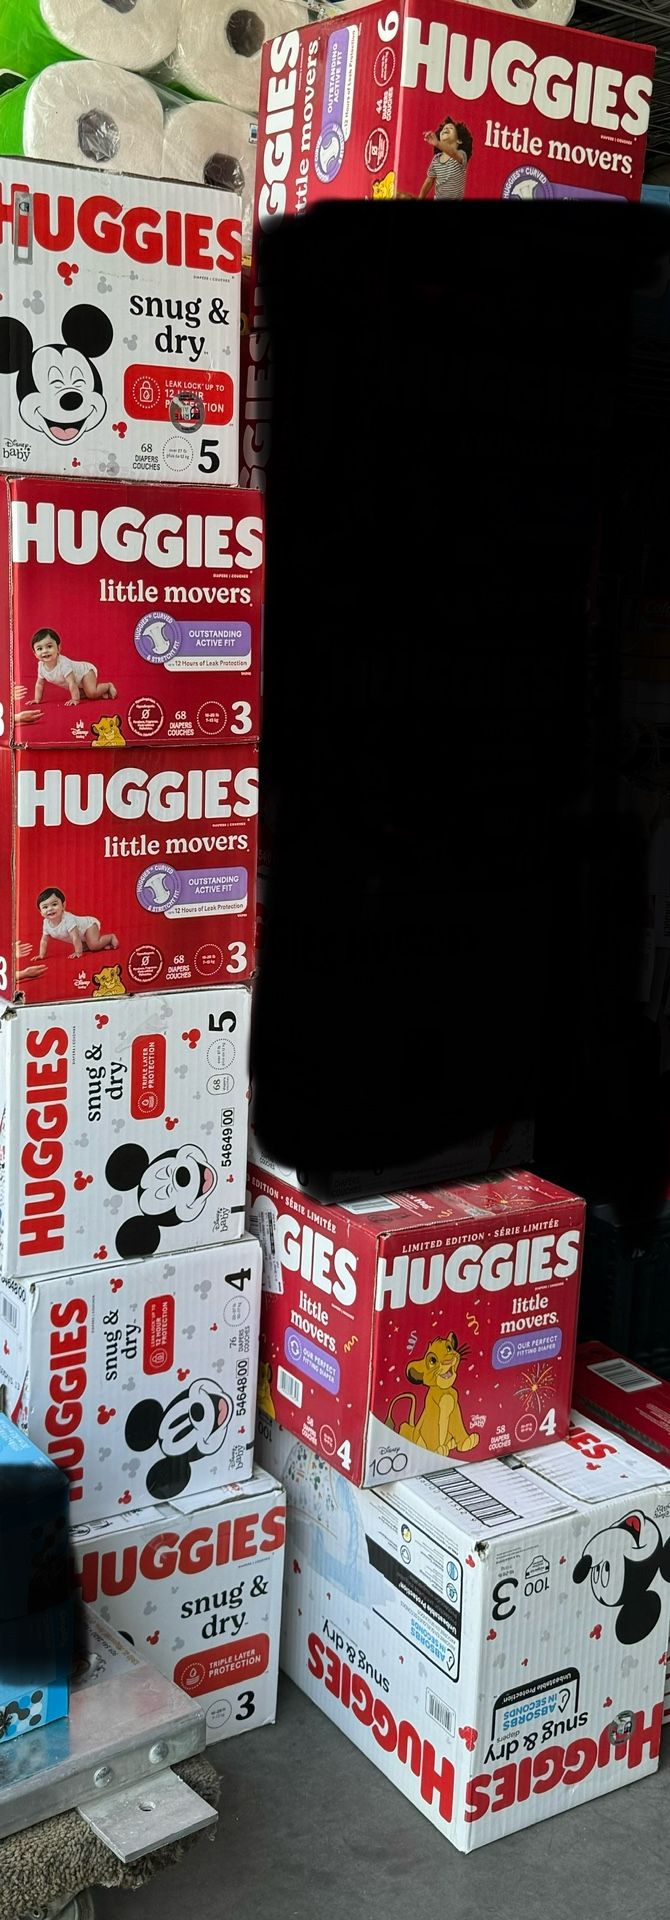 Huggies Diapers Size 3,4,5 Serious Buyers 